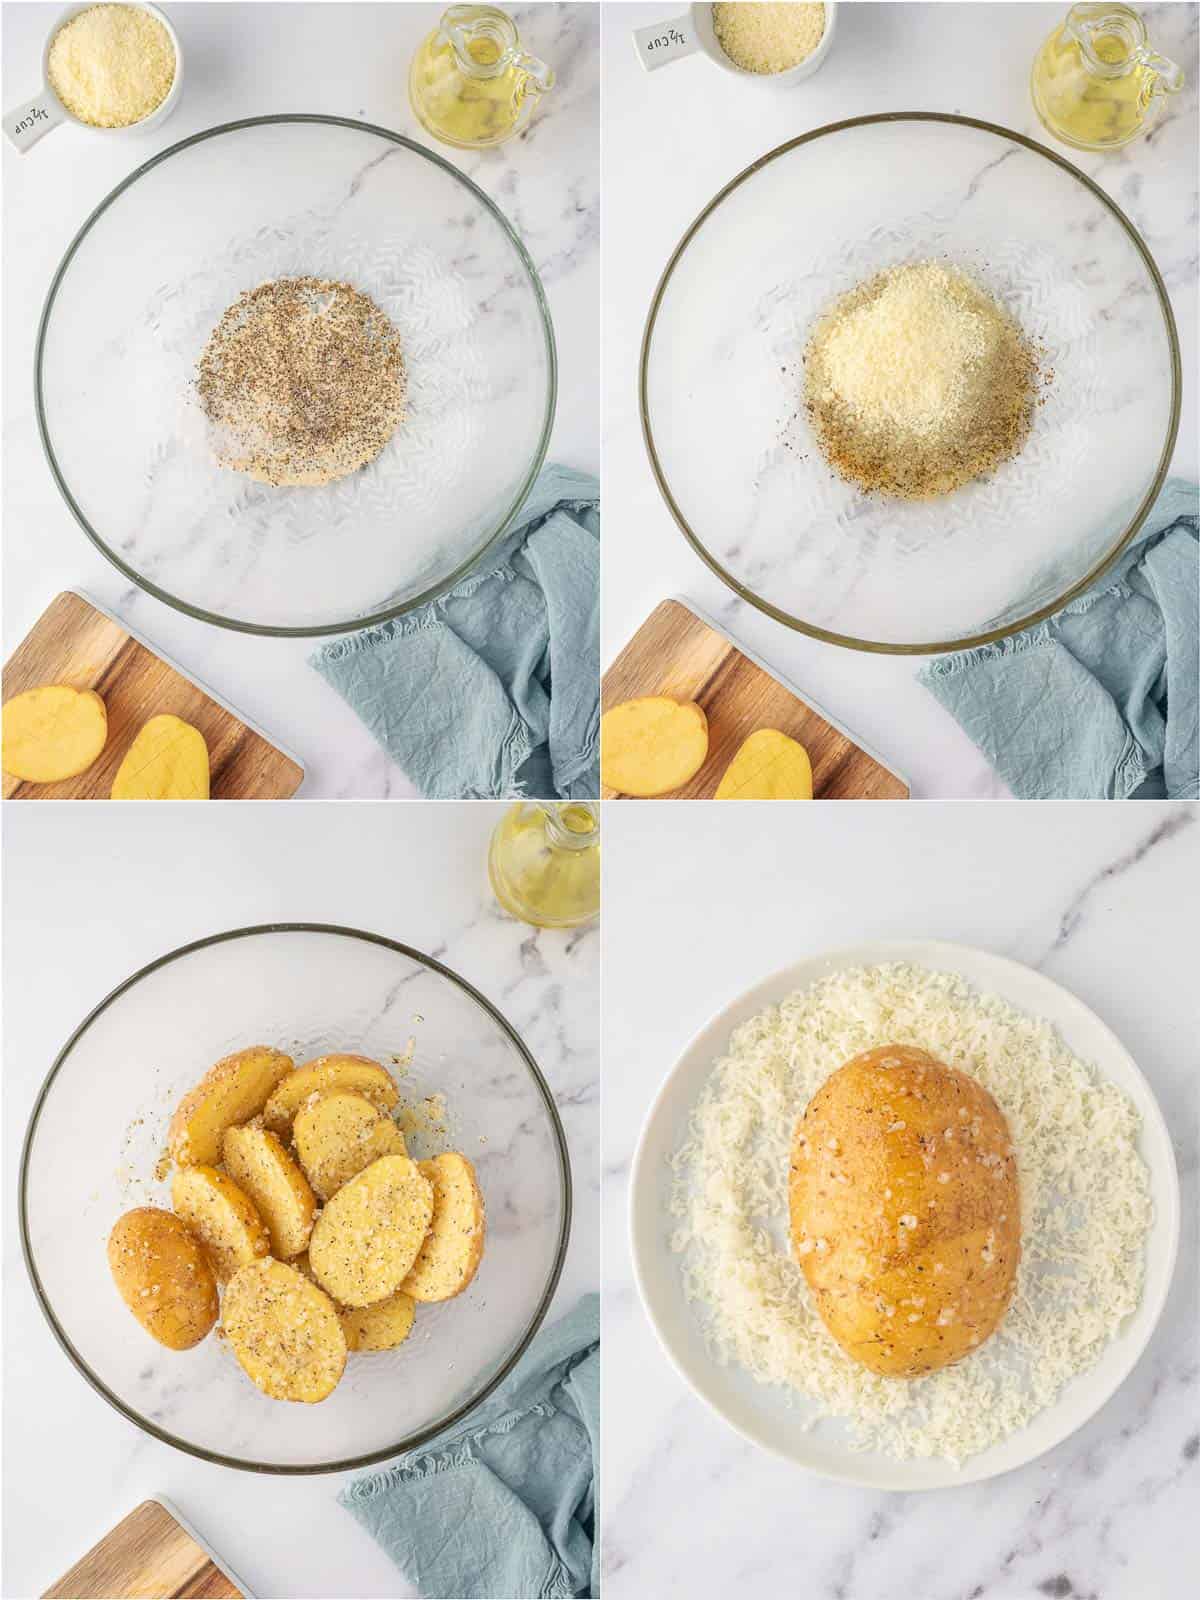 Step by step how to coat garlic parmesan potatoes.